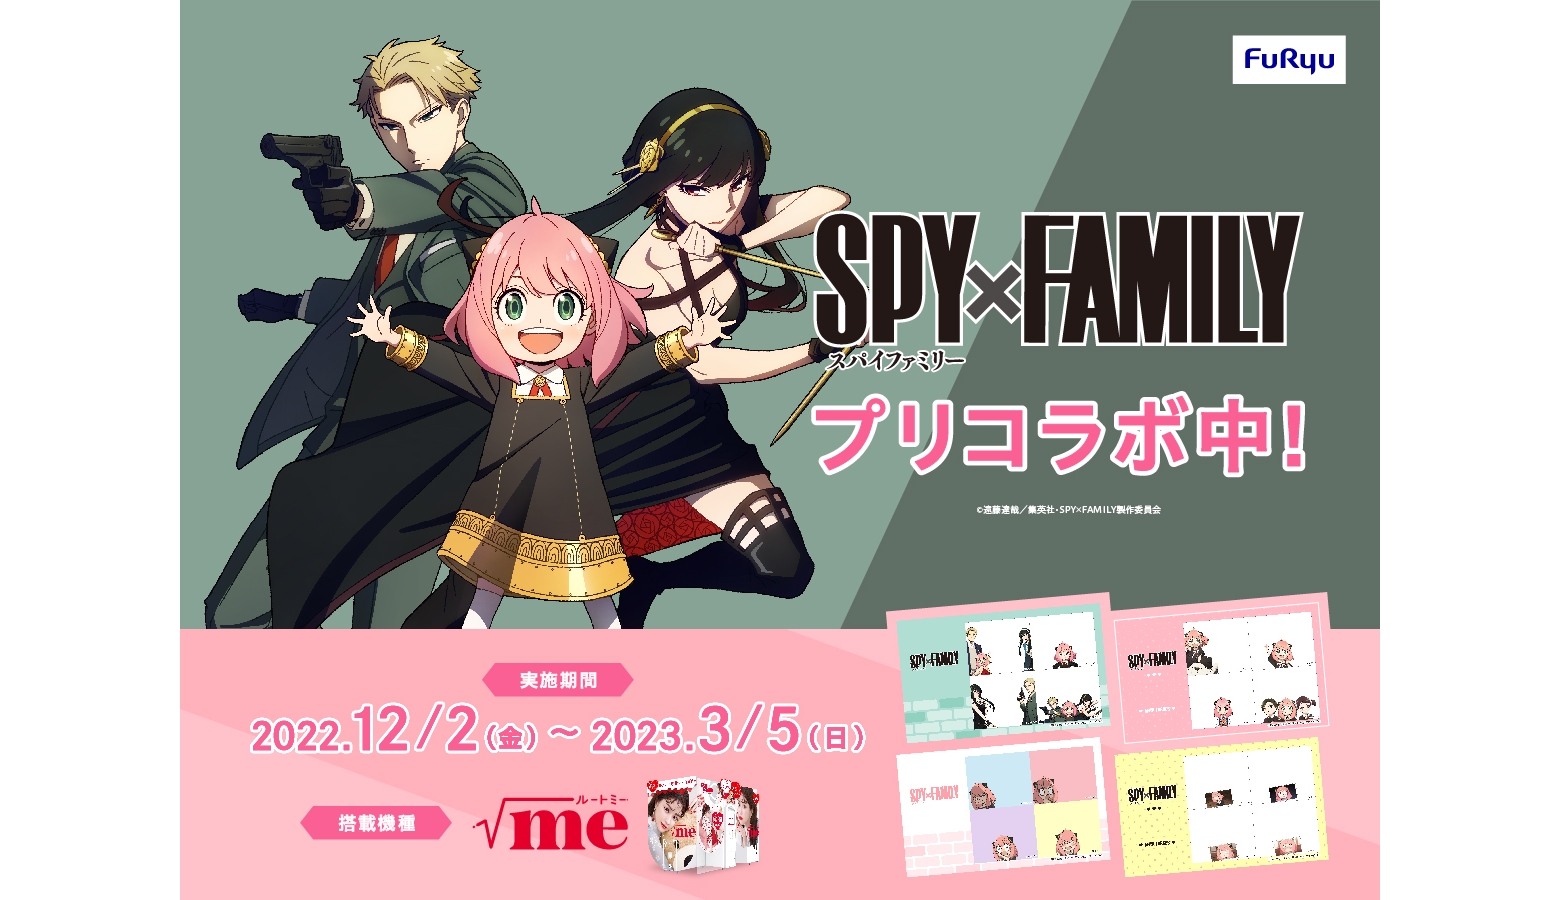 New Spy x Family 2nd Opening Features Bump of Chicken - Siliconera